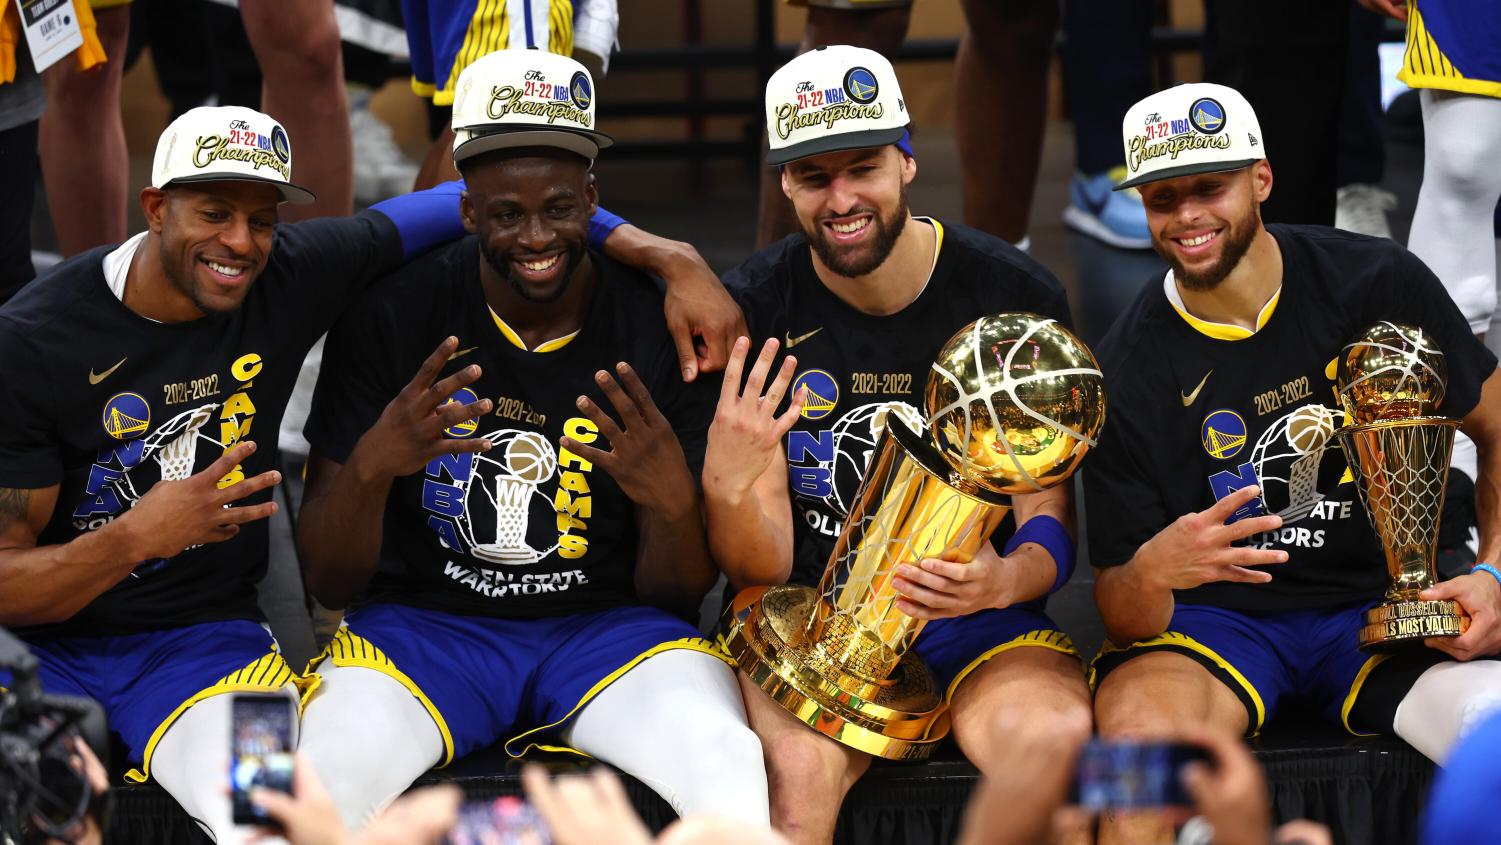 Warriors players celebrating after winning the 2022 NBA Finals. Photo by The New York Times.